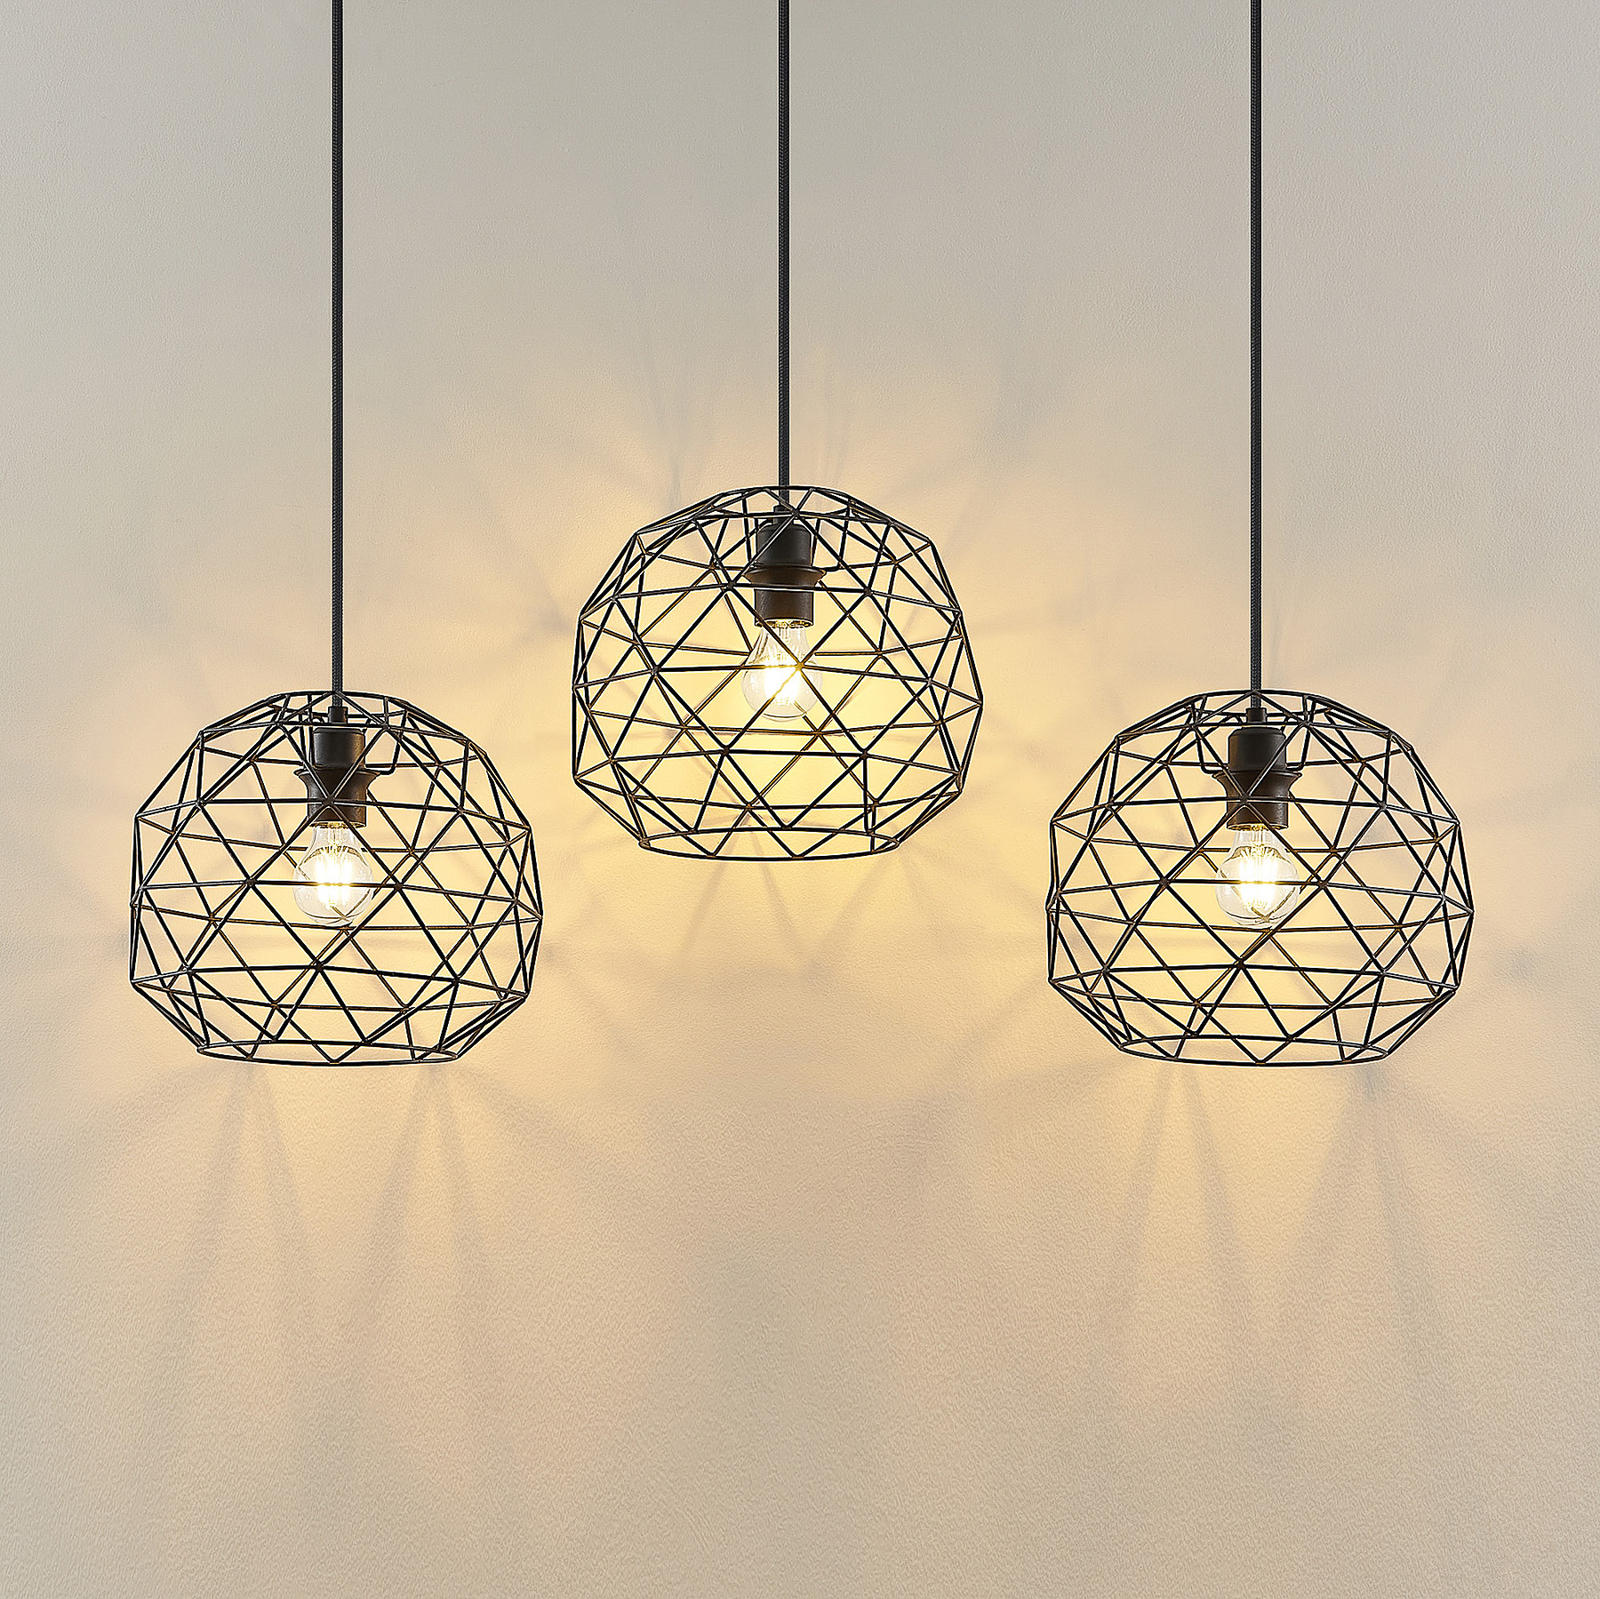 Lindby Paridimo hanglamp van staal, 3-lamps